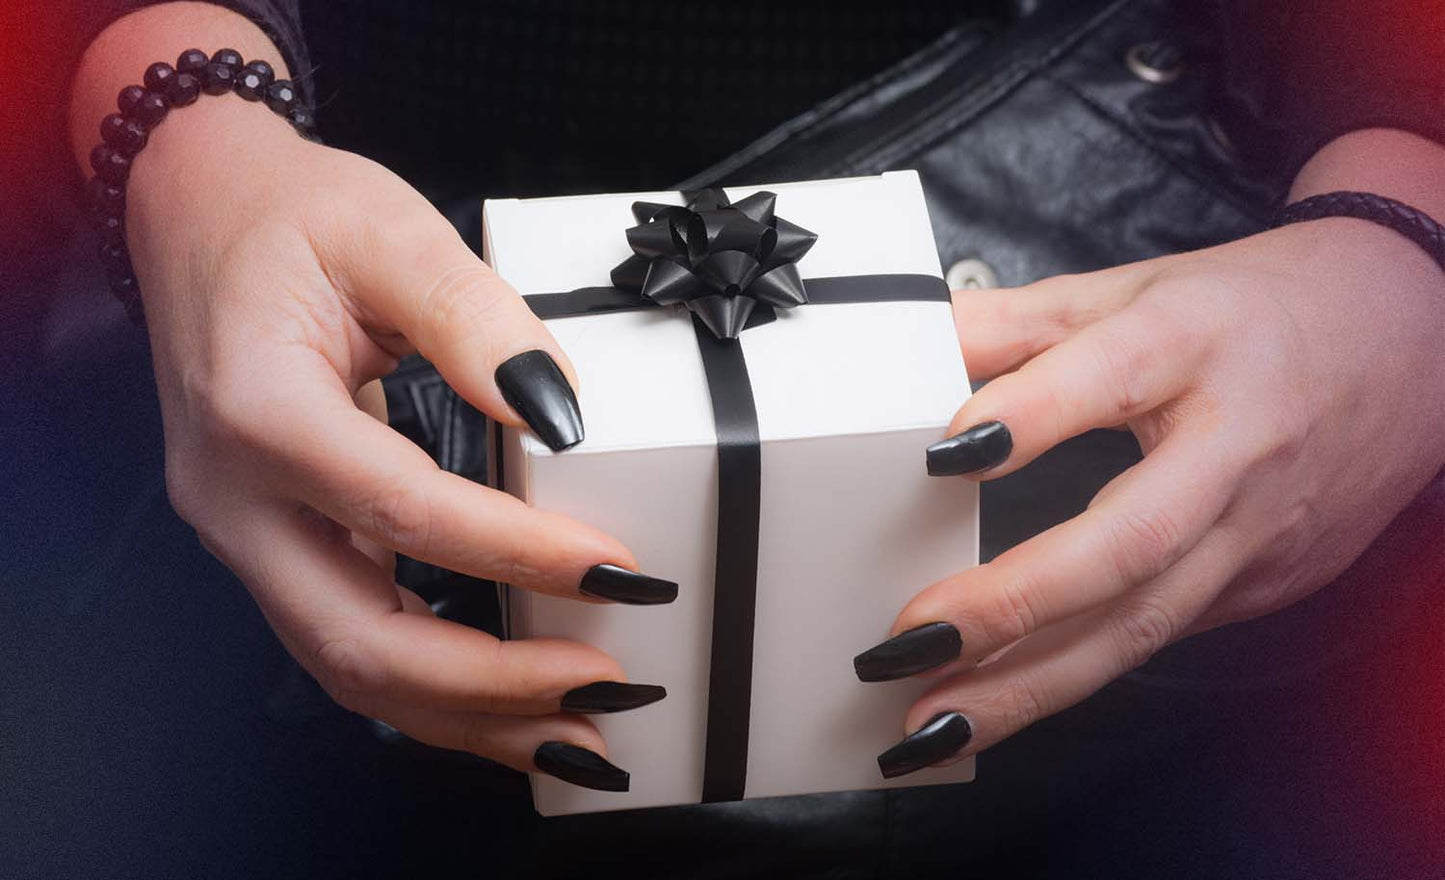 Gifts That'll Make Your Goth Friend's Black, Cold Heart Melt